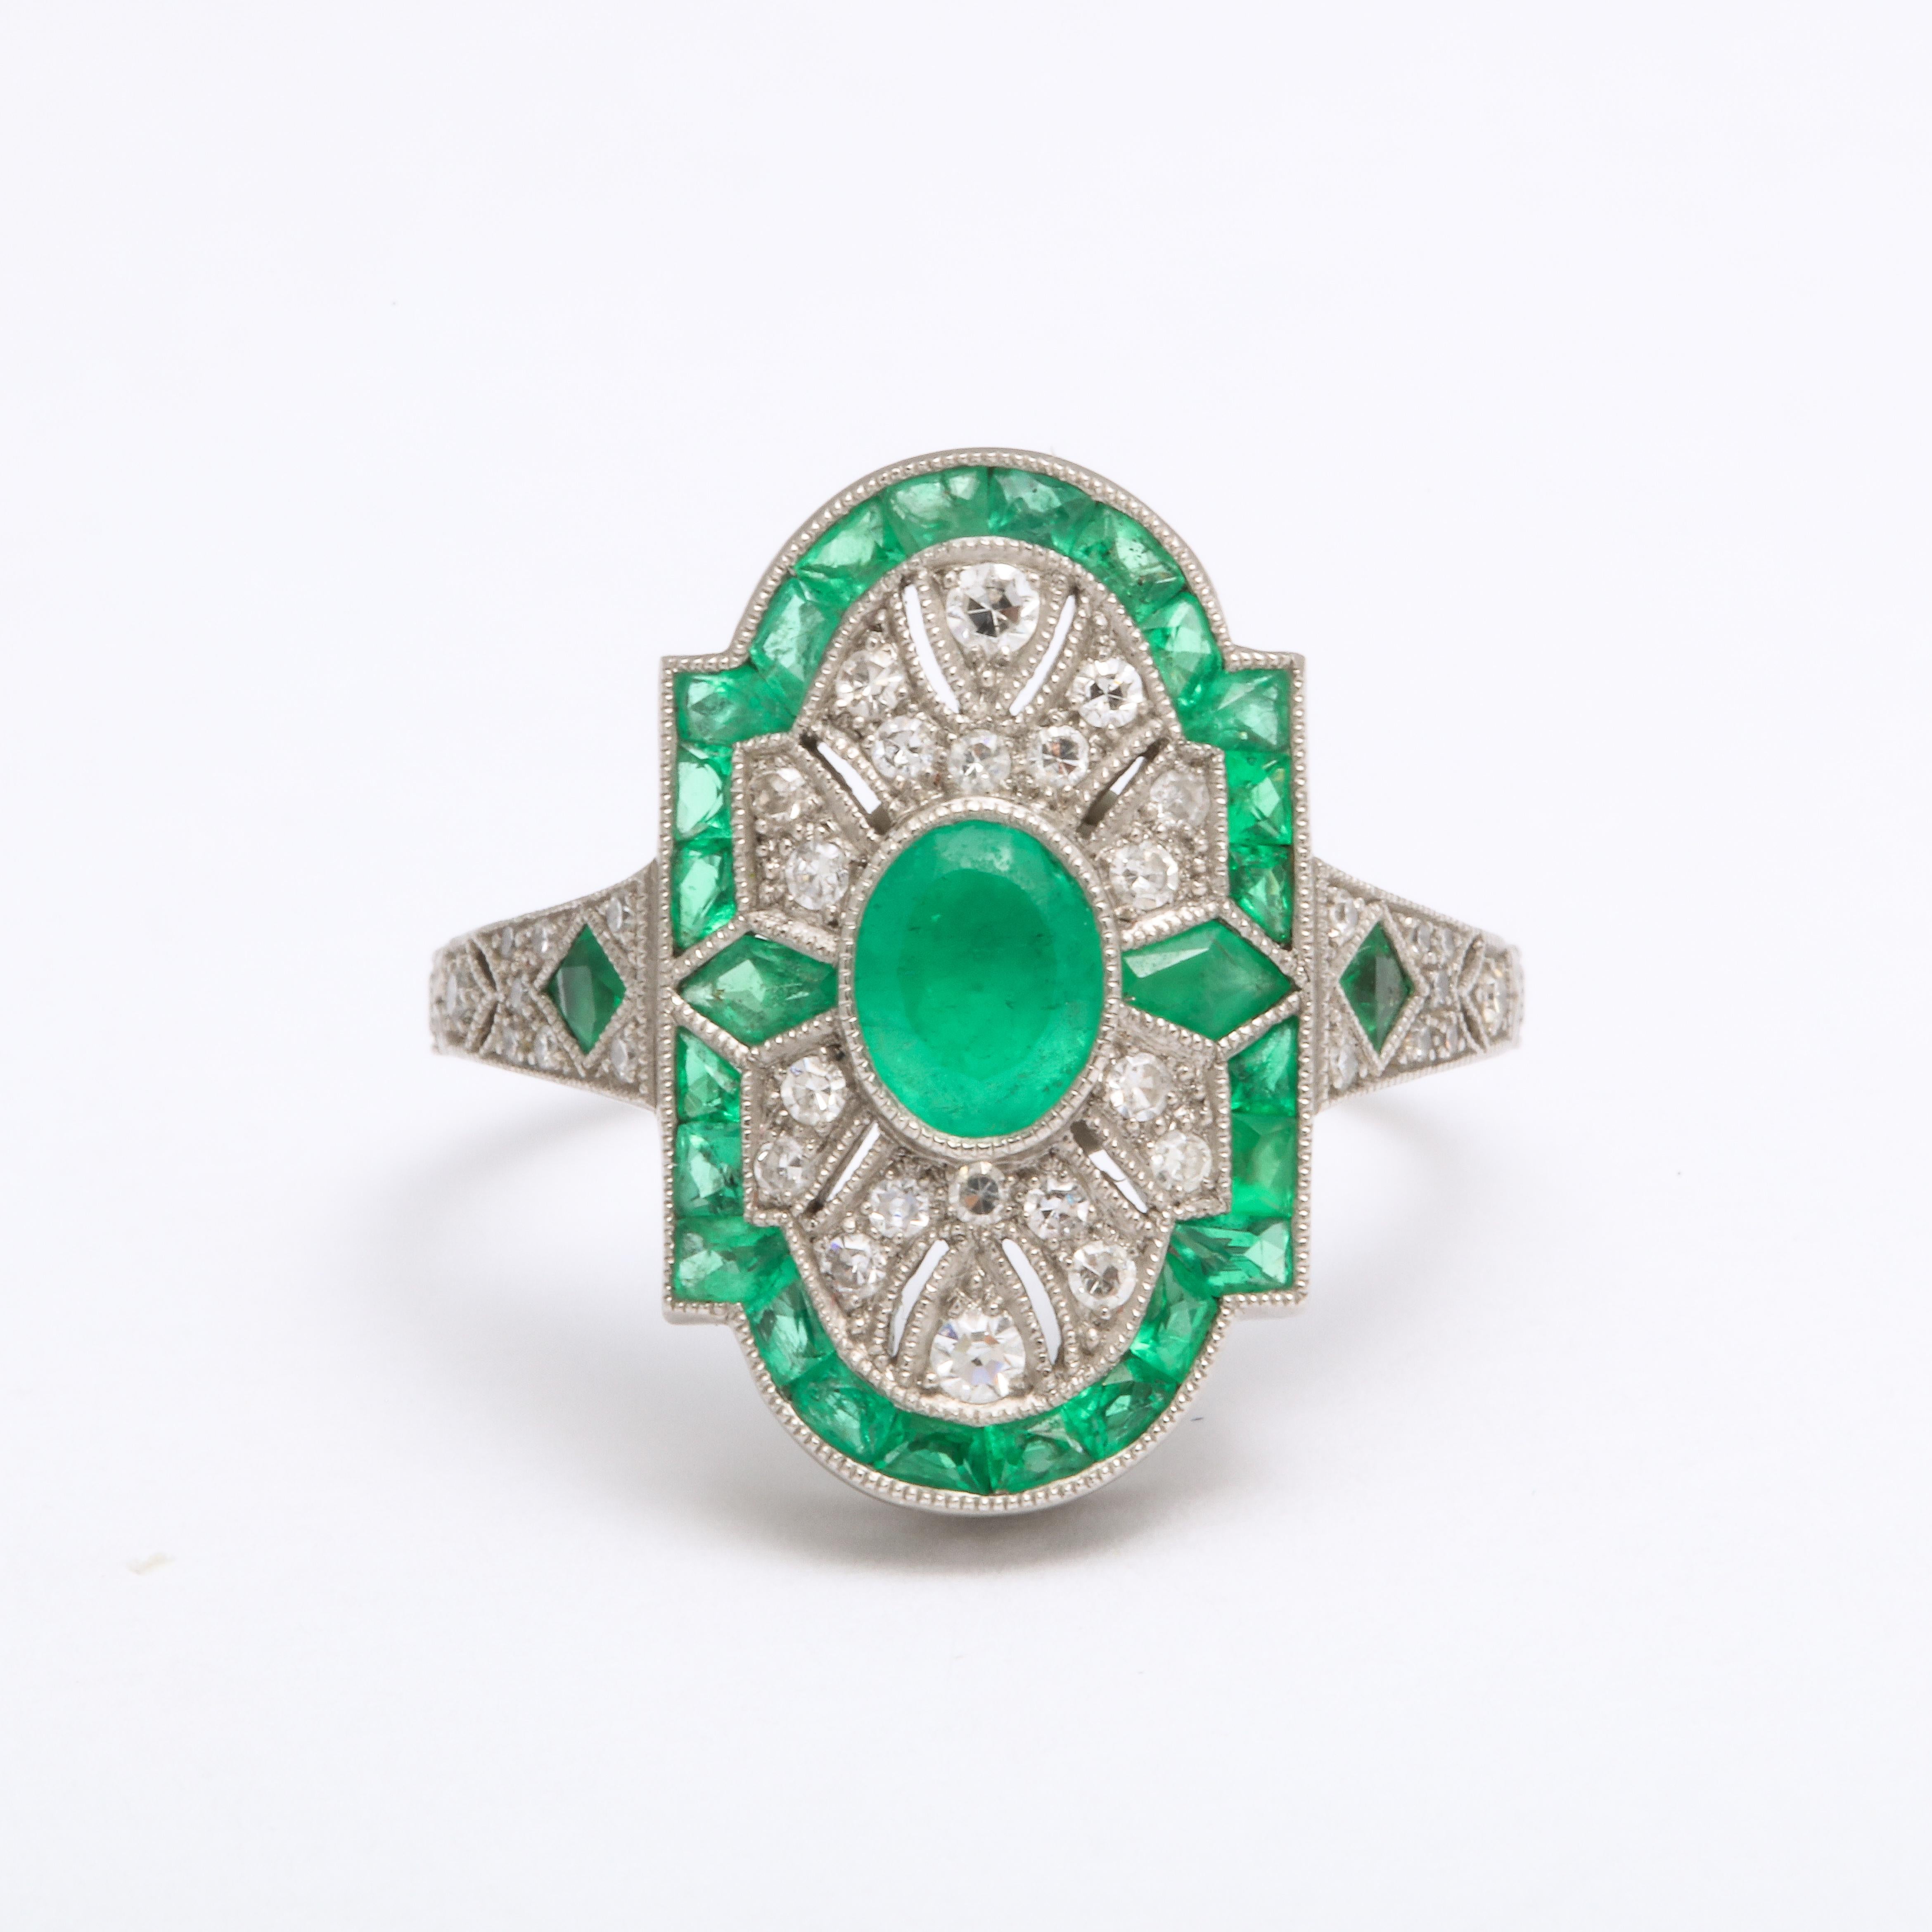 Like a breath of fresh air, or freshly cut grass, your senses absorb the green of the emeralds in this beautiful, hand made emerald, diamond Art Deco style ring. The gems are mixed cuts, oval at center, kite on either side of the oval, cabriolet